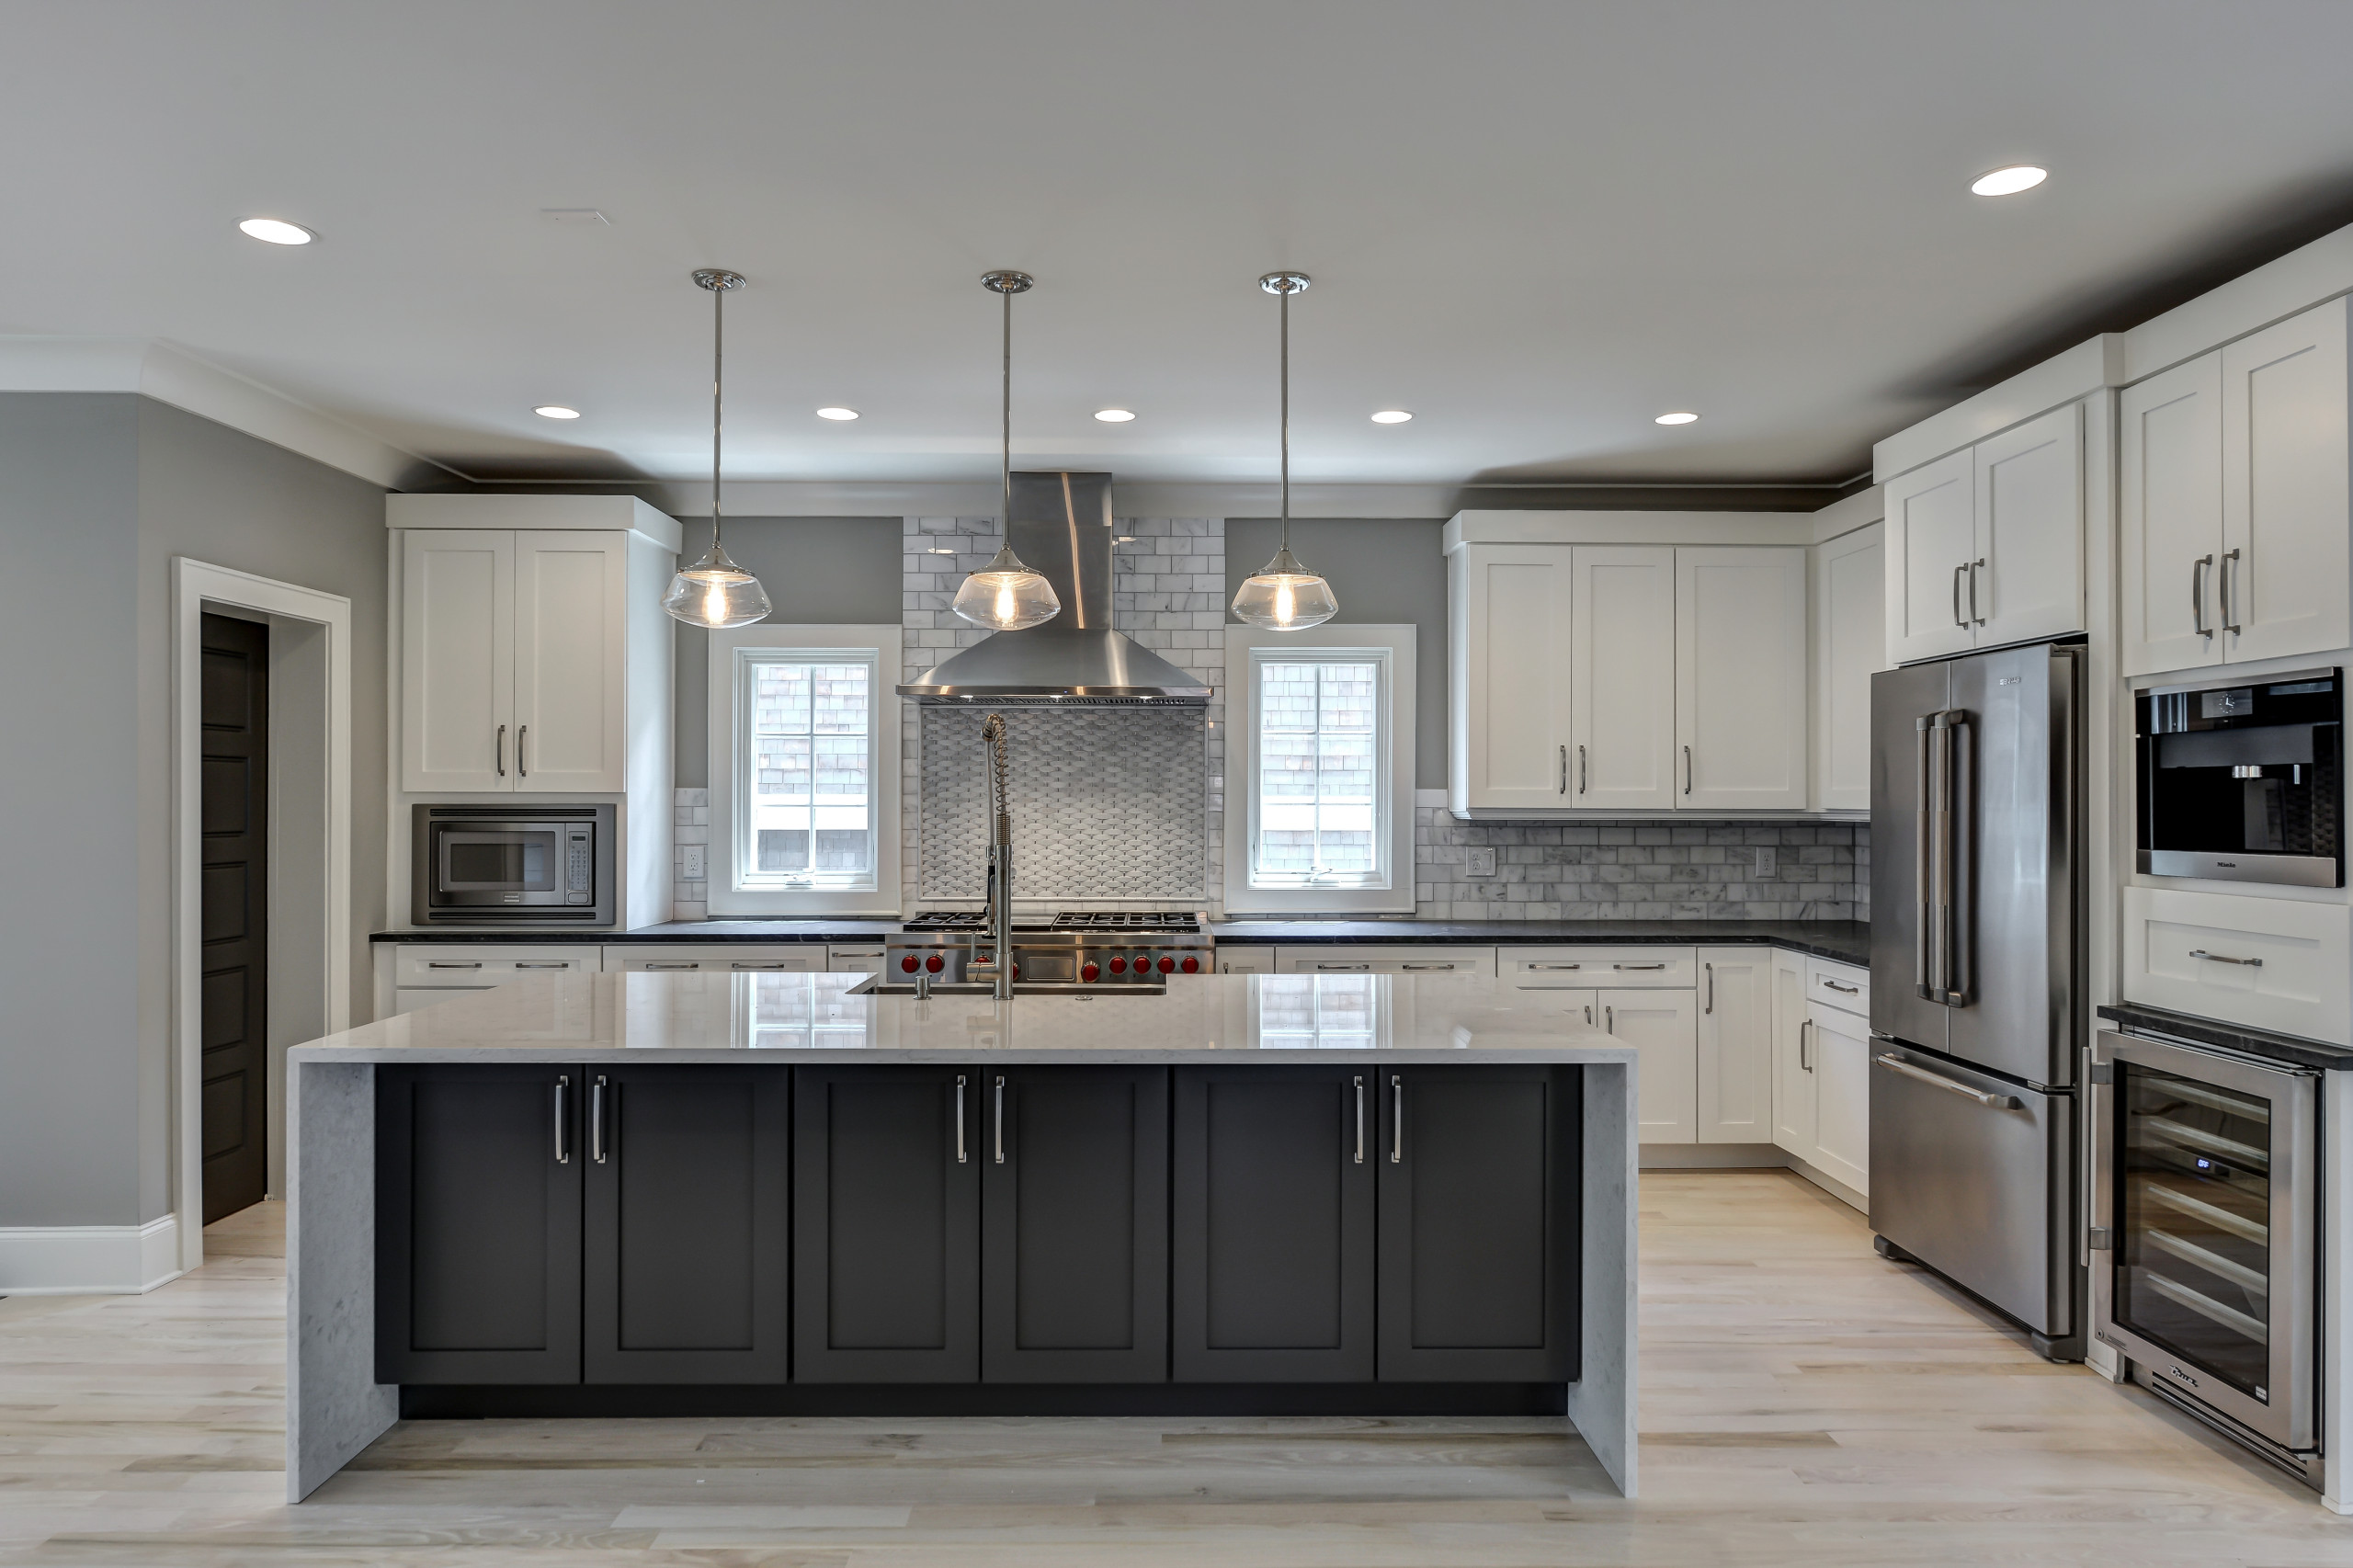 20 Beautiful White Kitchen Cabinets Pictures & Ideas   Houzz